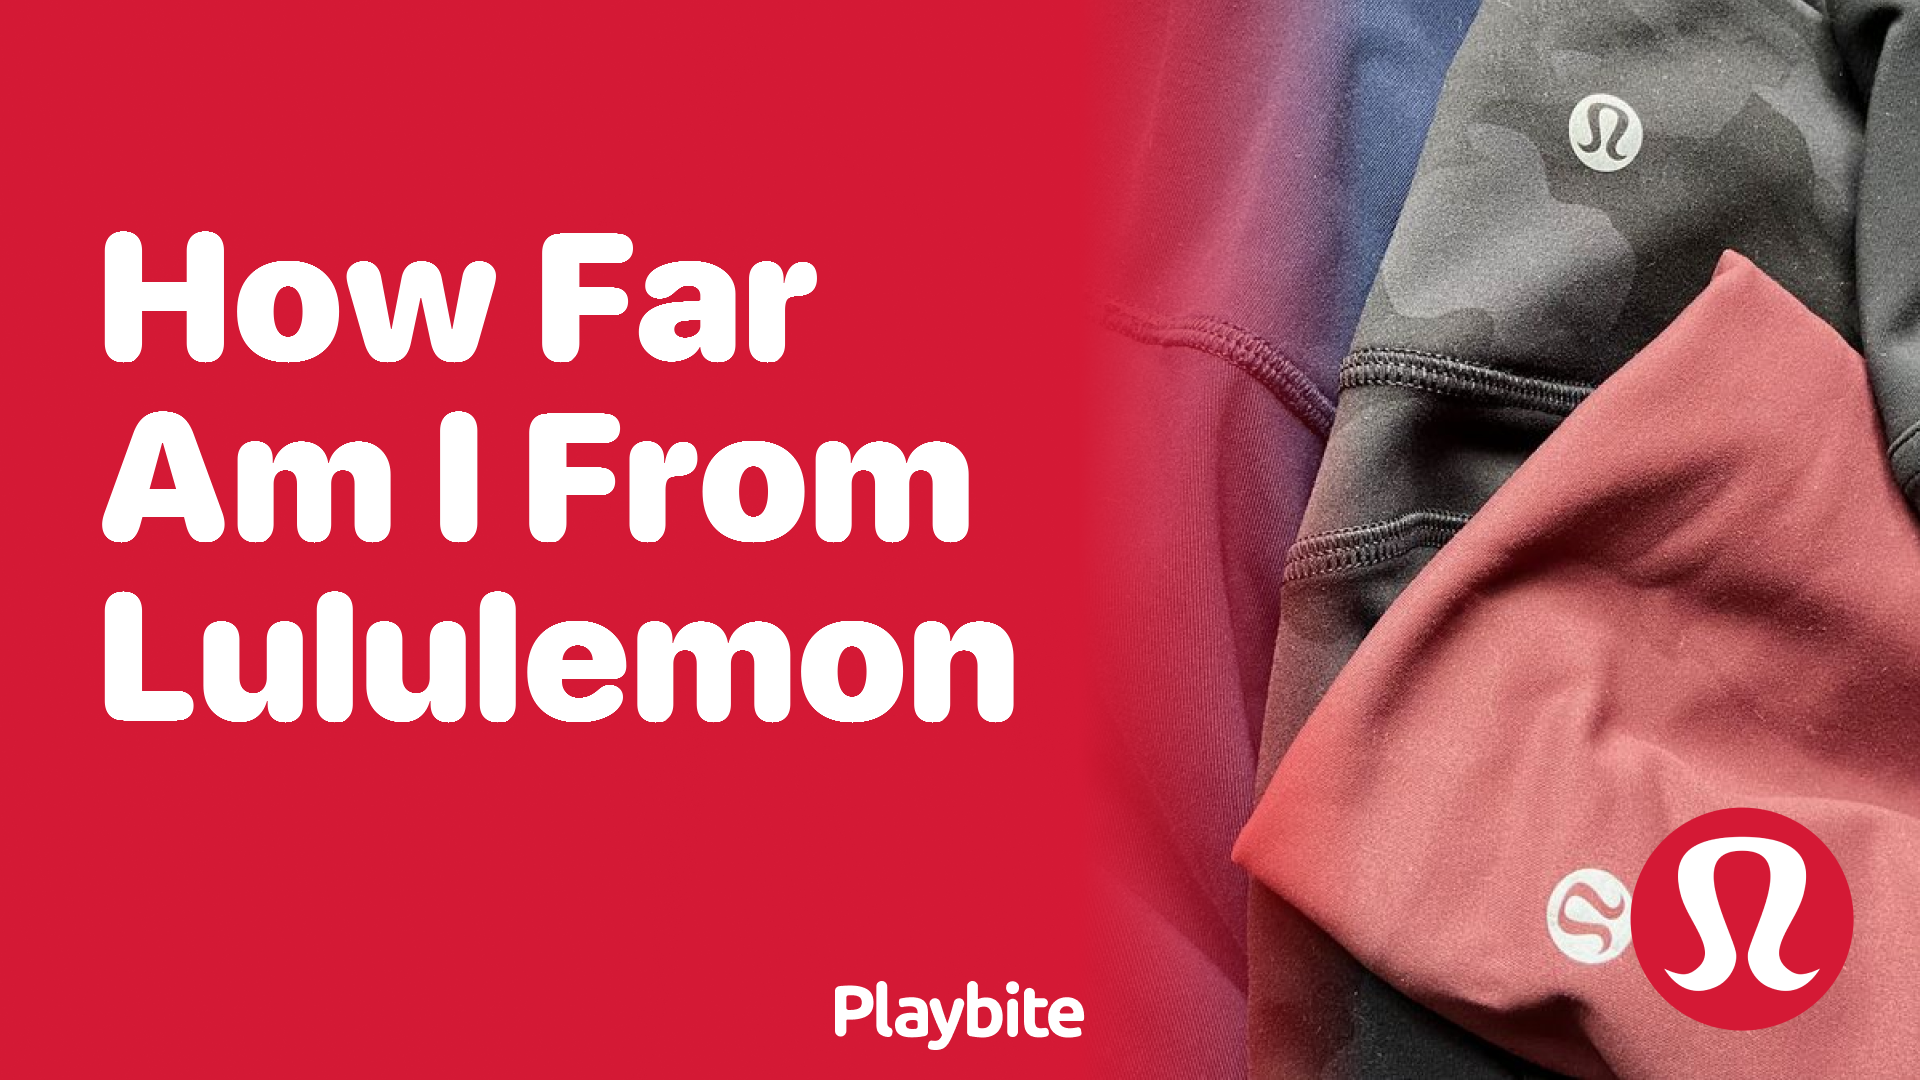 Where Is the Closest Lululemon Store to You? - Playbite